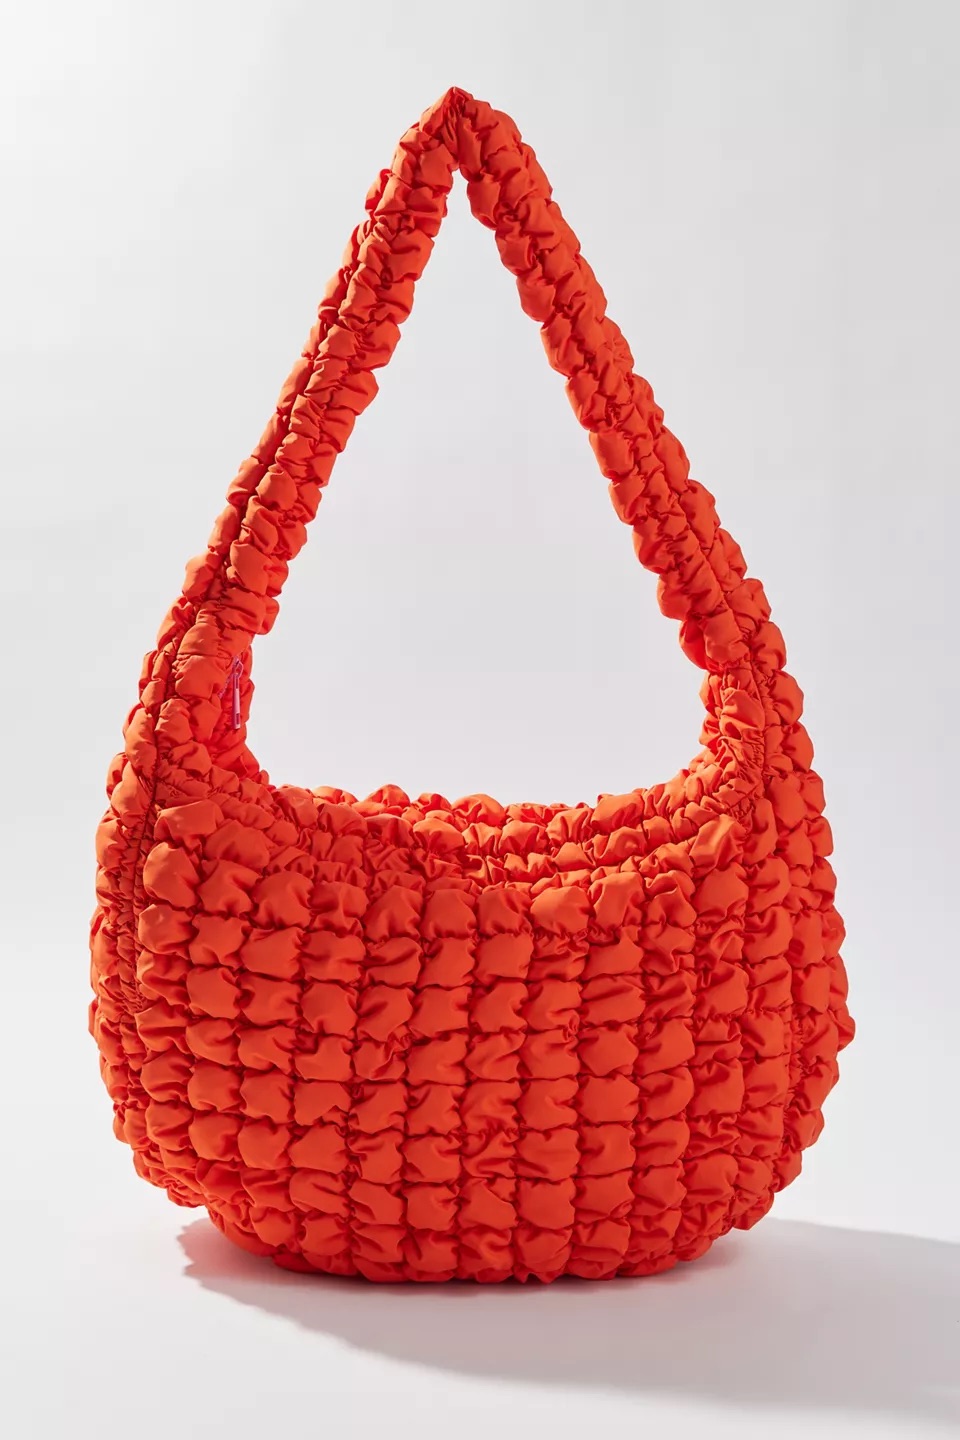 Shop 17 of the Best Orange Purses Starting at Just $25 | Who What Wear